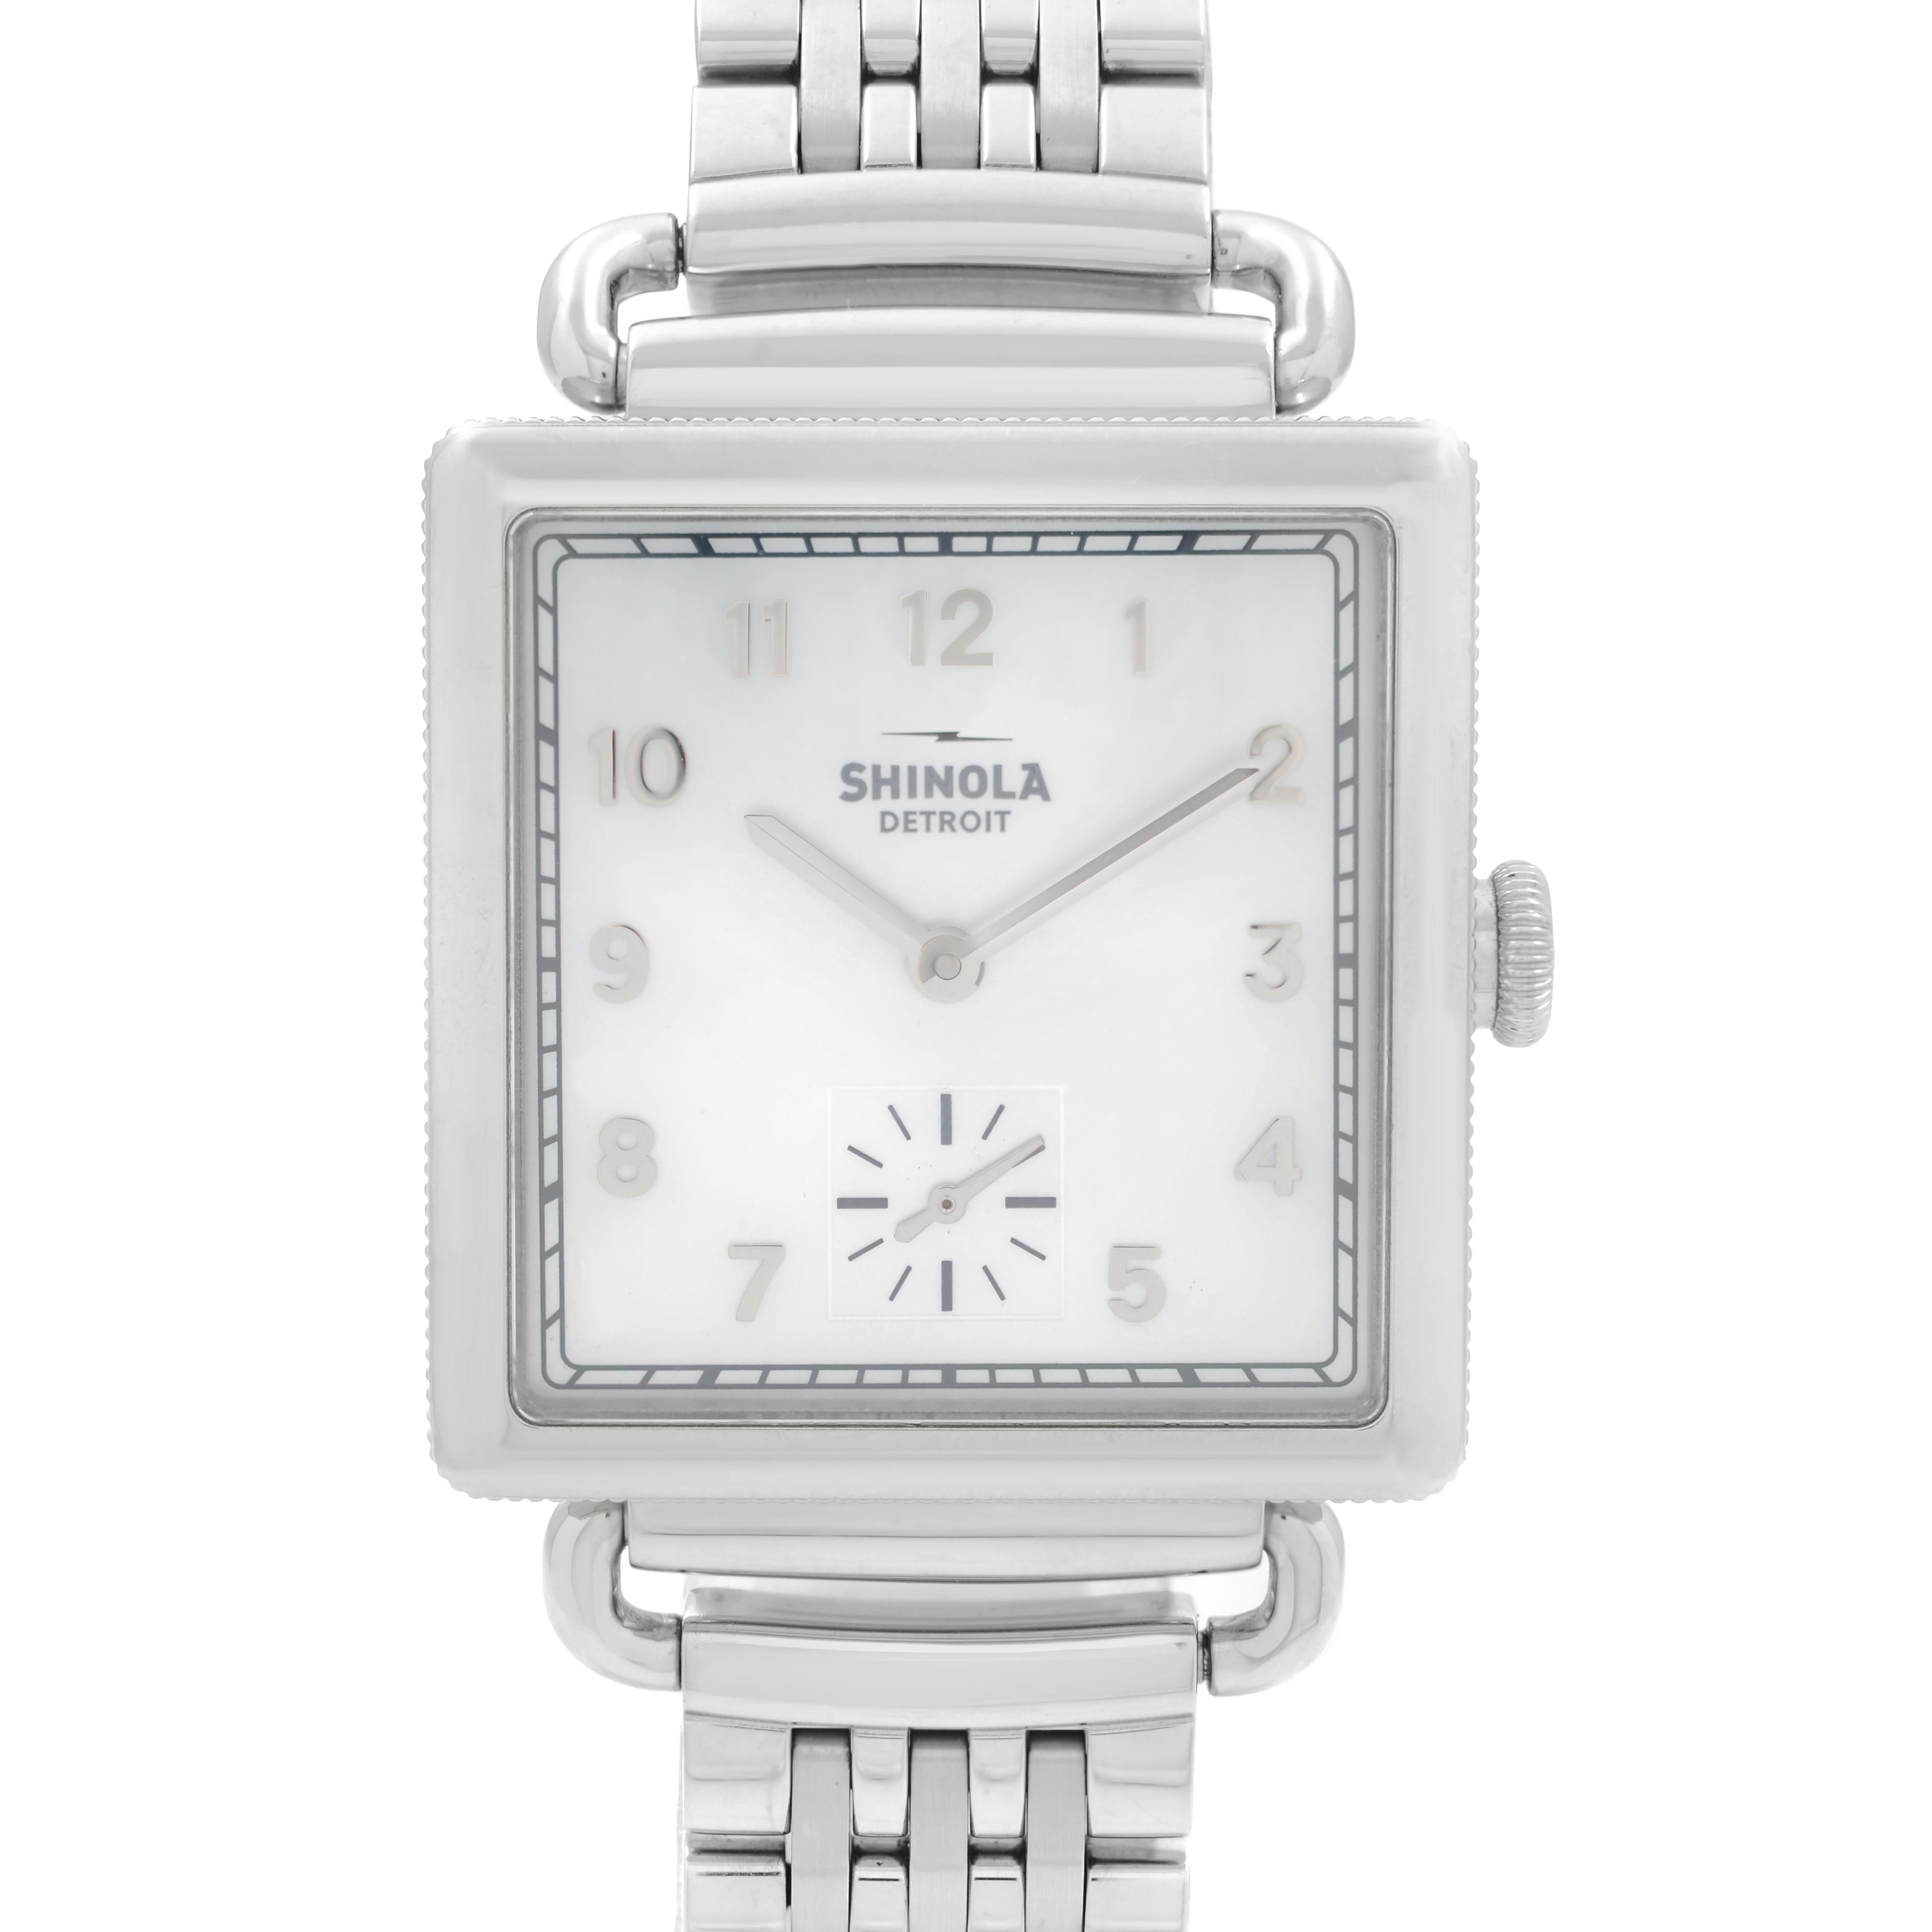 Pre-Owned Shinola The Cass 28mm Stainless Steel MOP Dial Quartz Ladies Watch S0120065280. No Original Box and Papers are Included. Comes with Chronostore Presentation Box and Authenticity Card. Covered by 1-year Chronostore Warranty.
Details:
MSRP